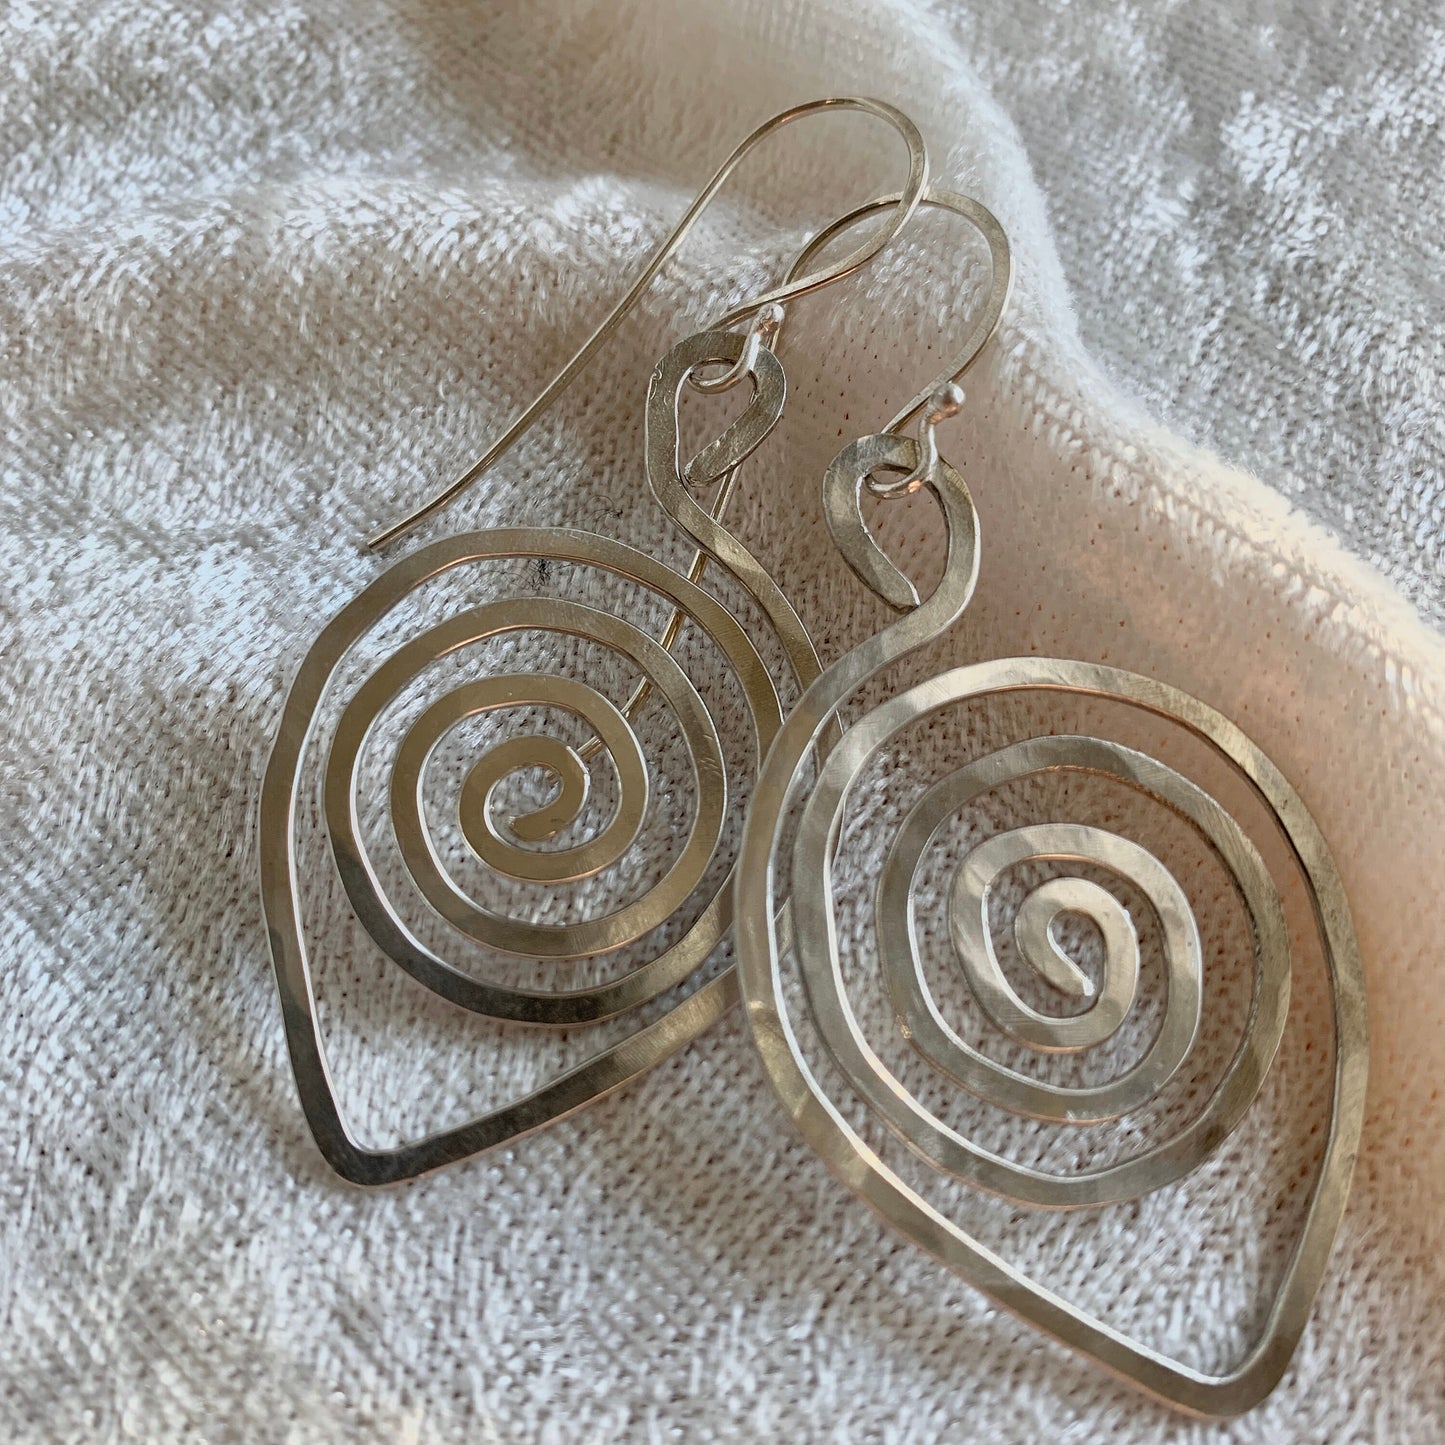 Spiral leaf-shaped earrings - spiral design leaf in silver wire with sterling silver ear wires.